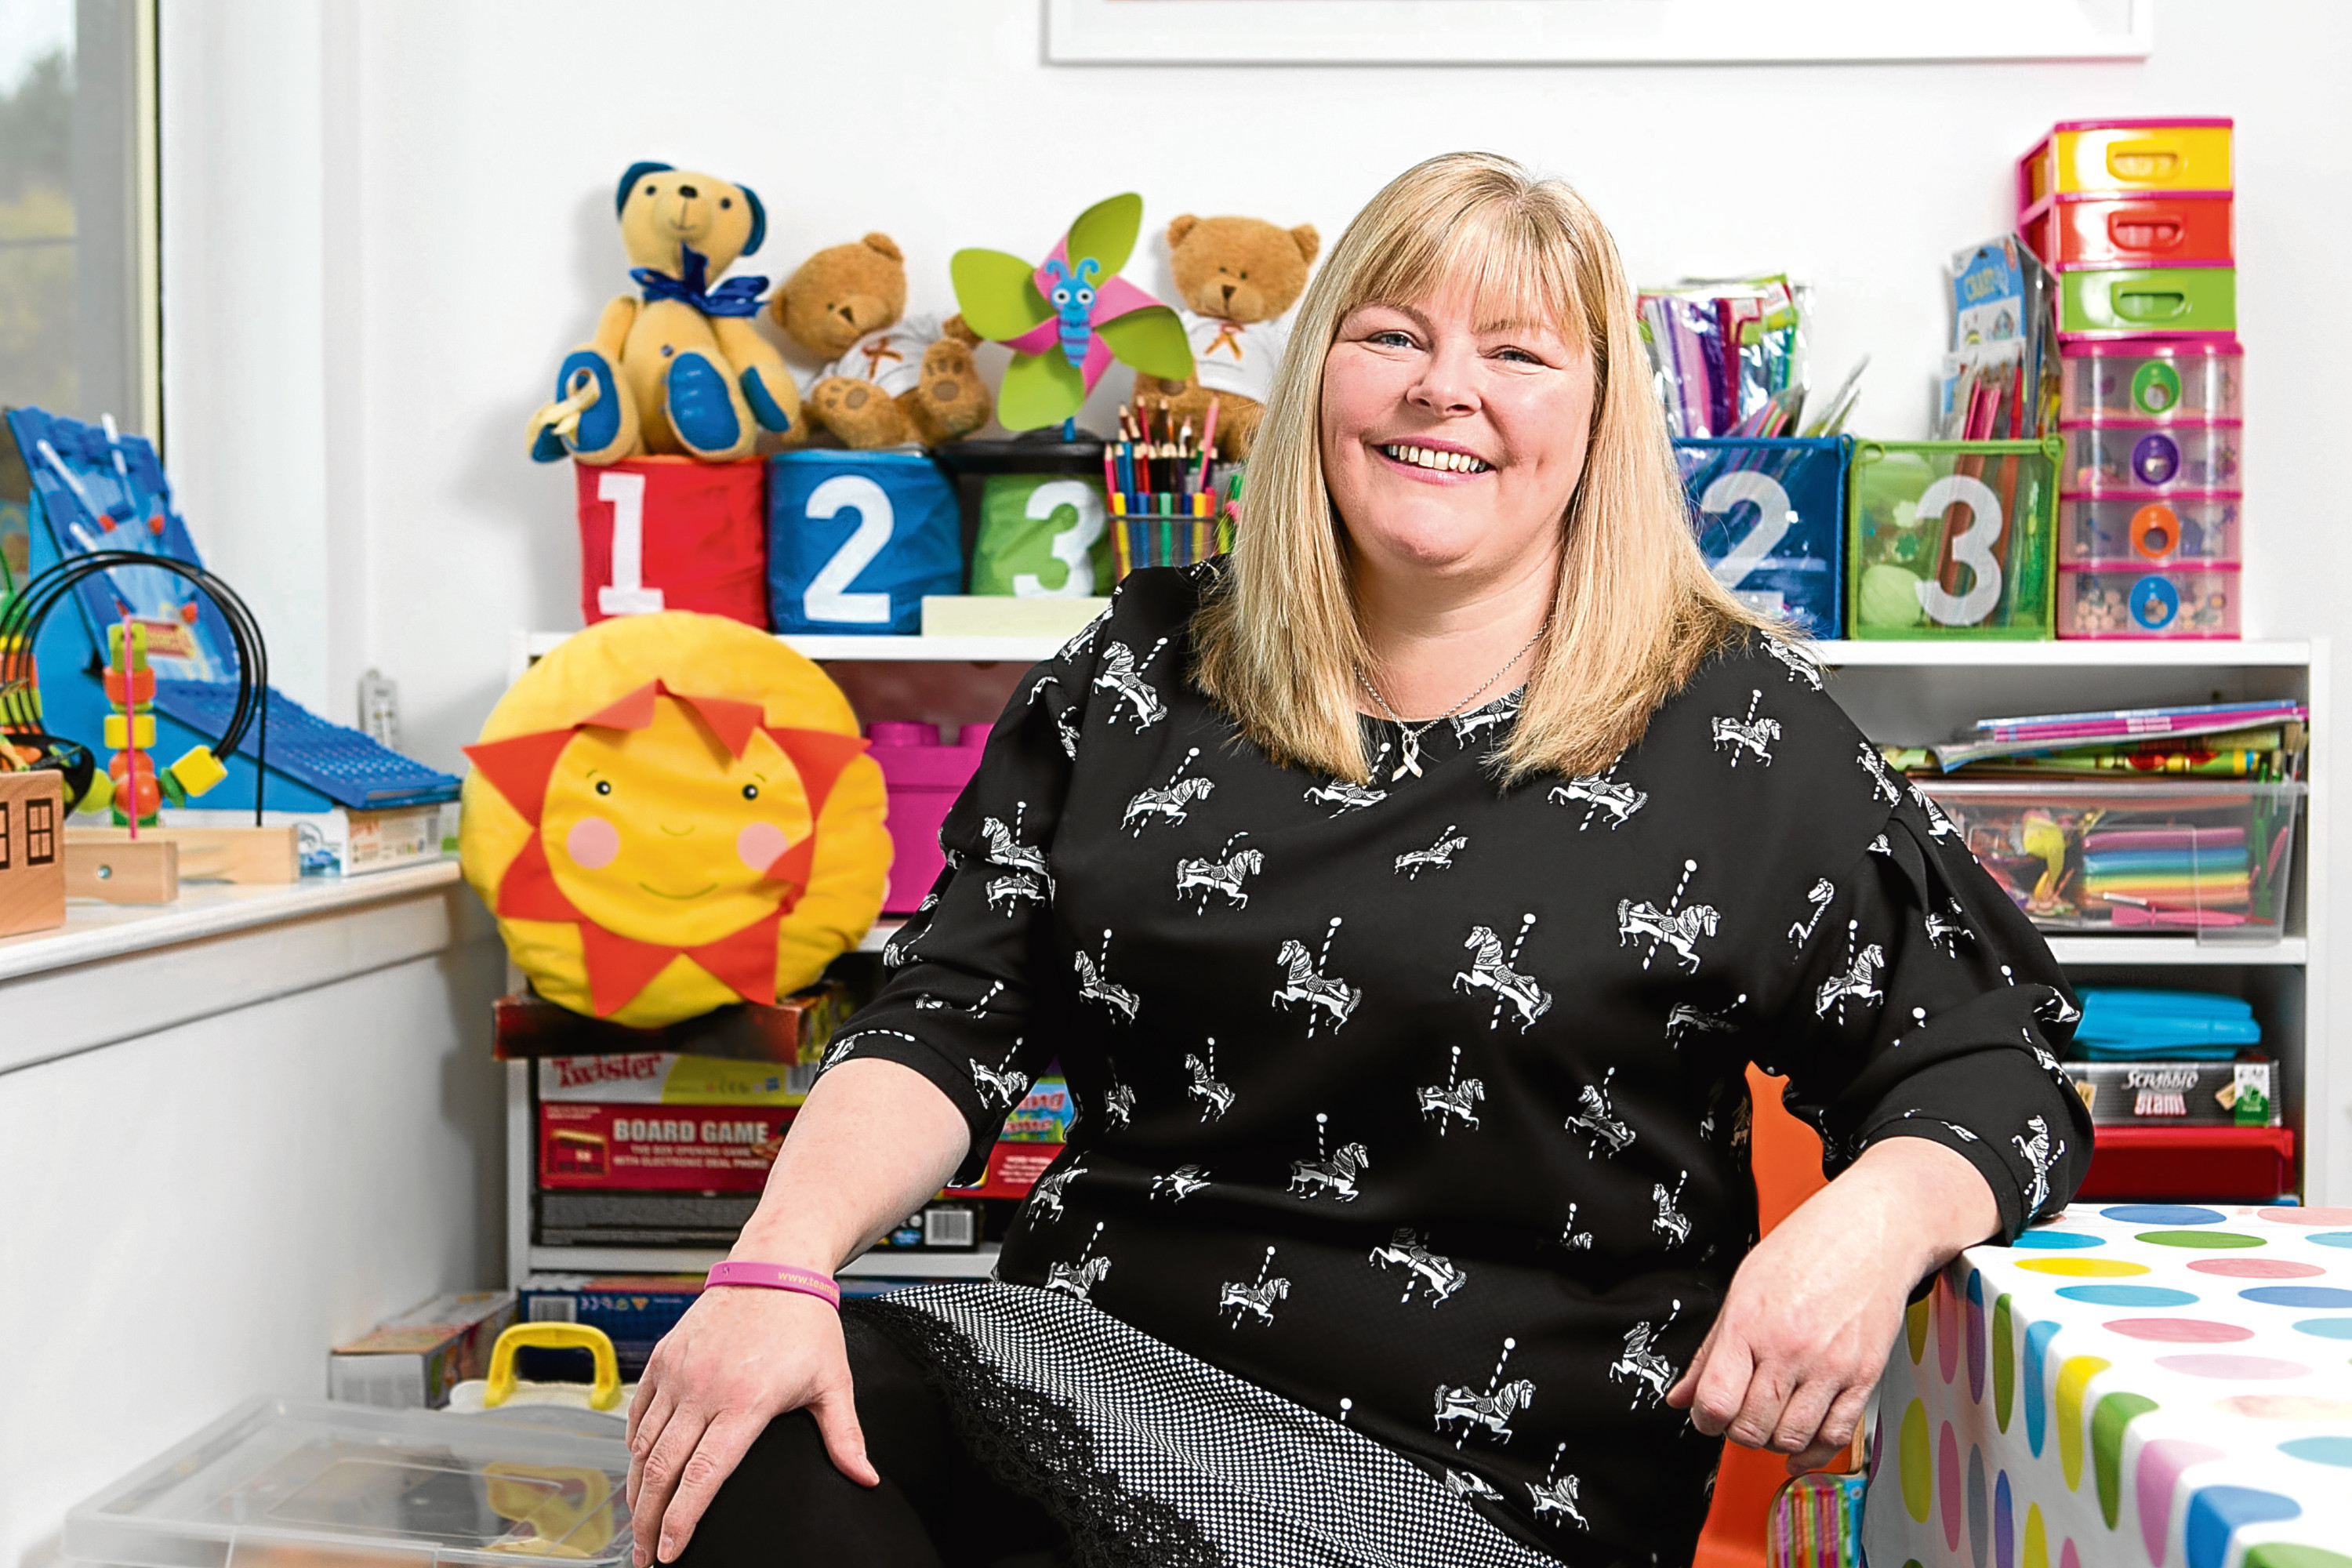 Allison Barr, founder of Team Jak's Foundation, at Jak's Den, which was built in memory of her son, Jak, who died of Cancer. (Andrew Cawley, DC Thomson)